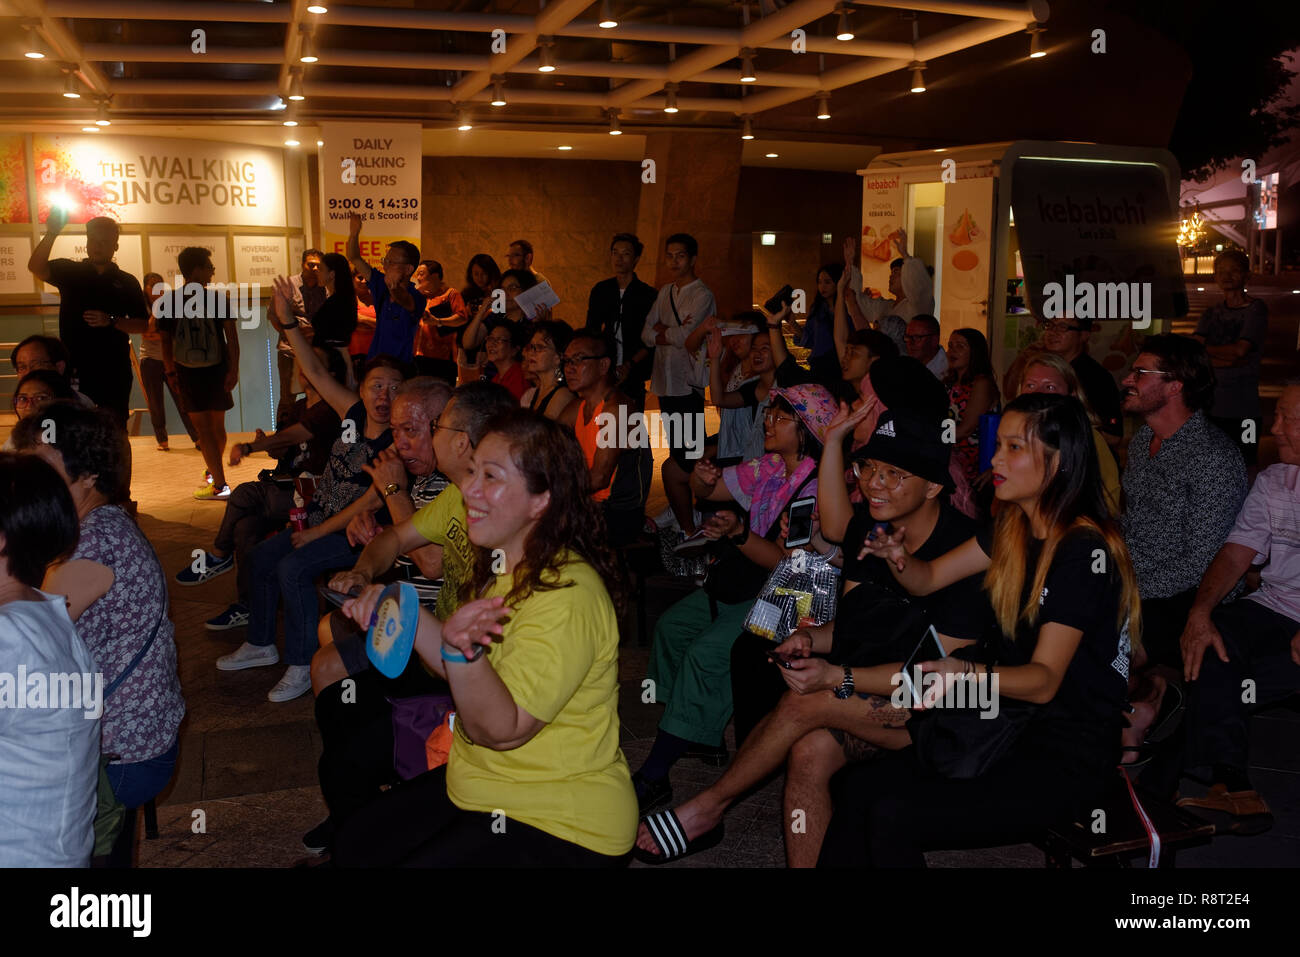 Enthusiastic audience clapping and cheering karaoke singer along the Esplanade walk in Singapore Stock Photo